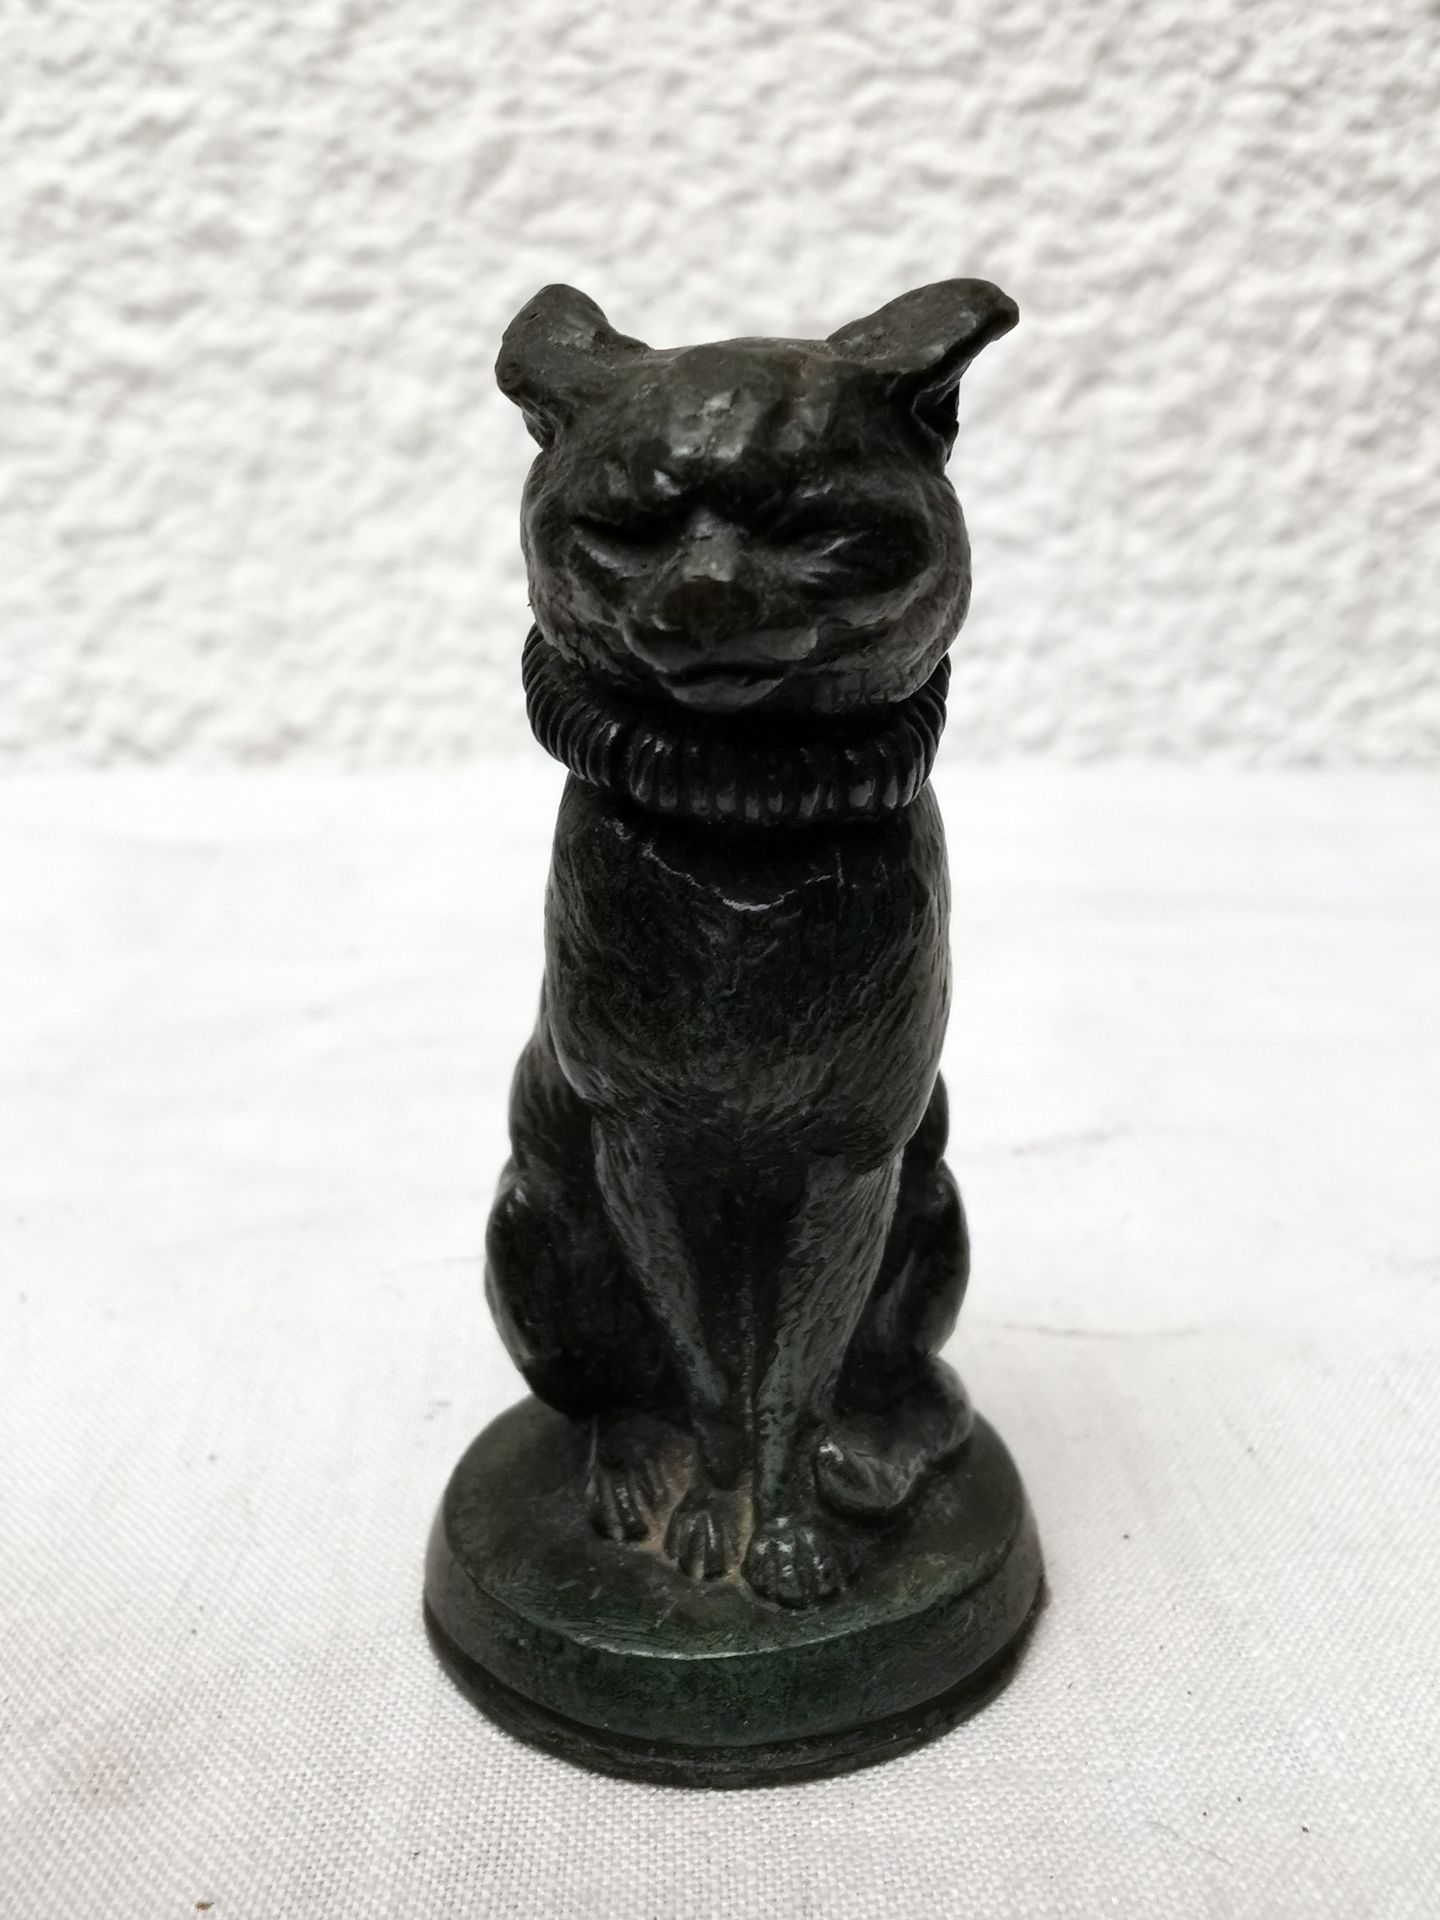 LE CHAT "THE CAT" BRONZE PATINA MEDAL 5,5X3X3